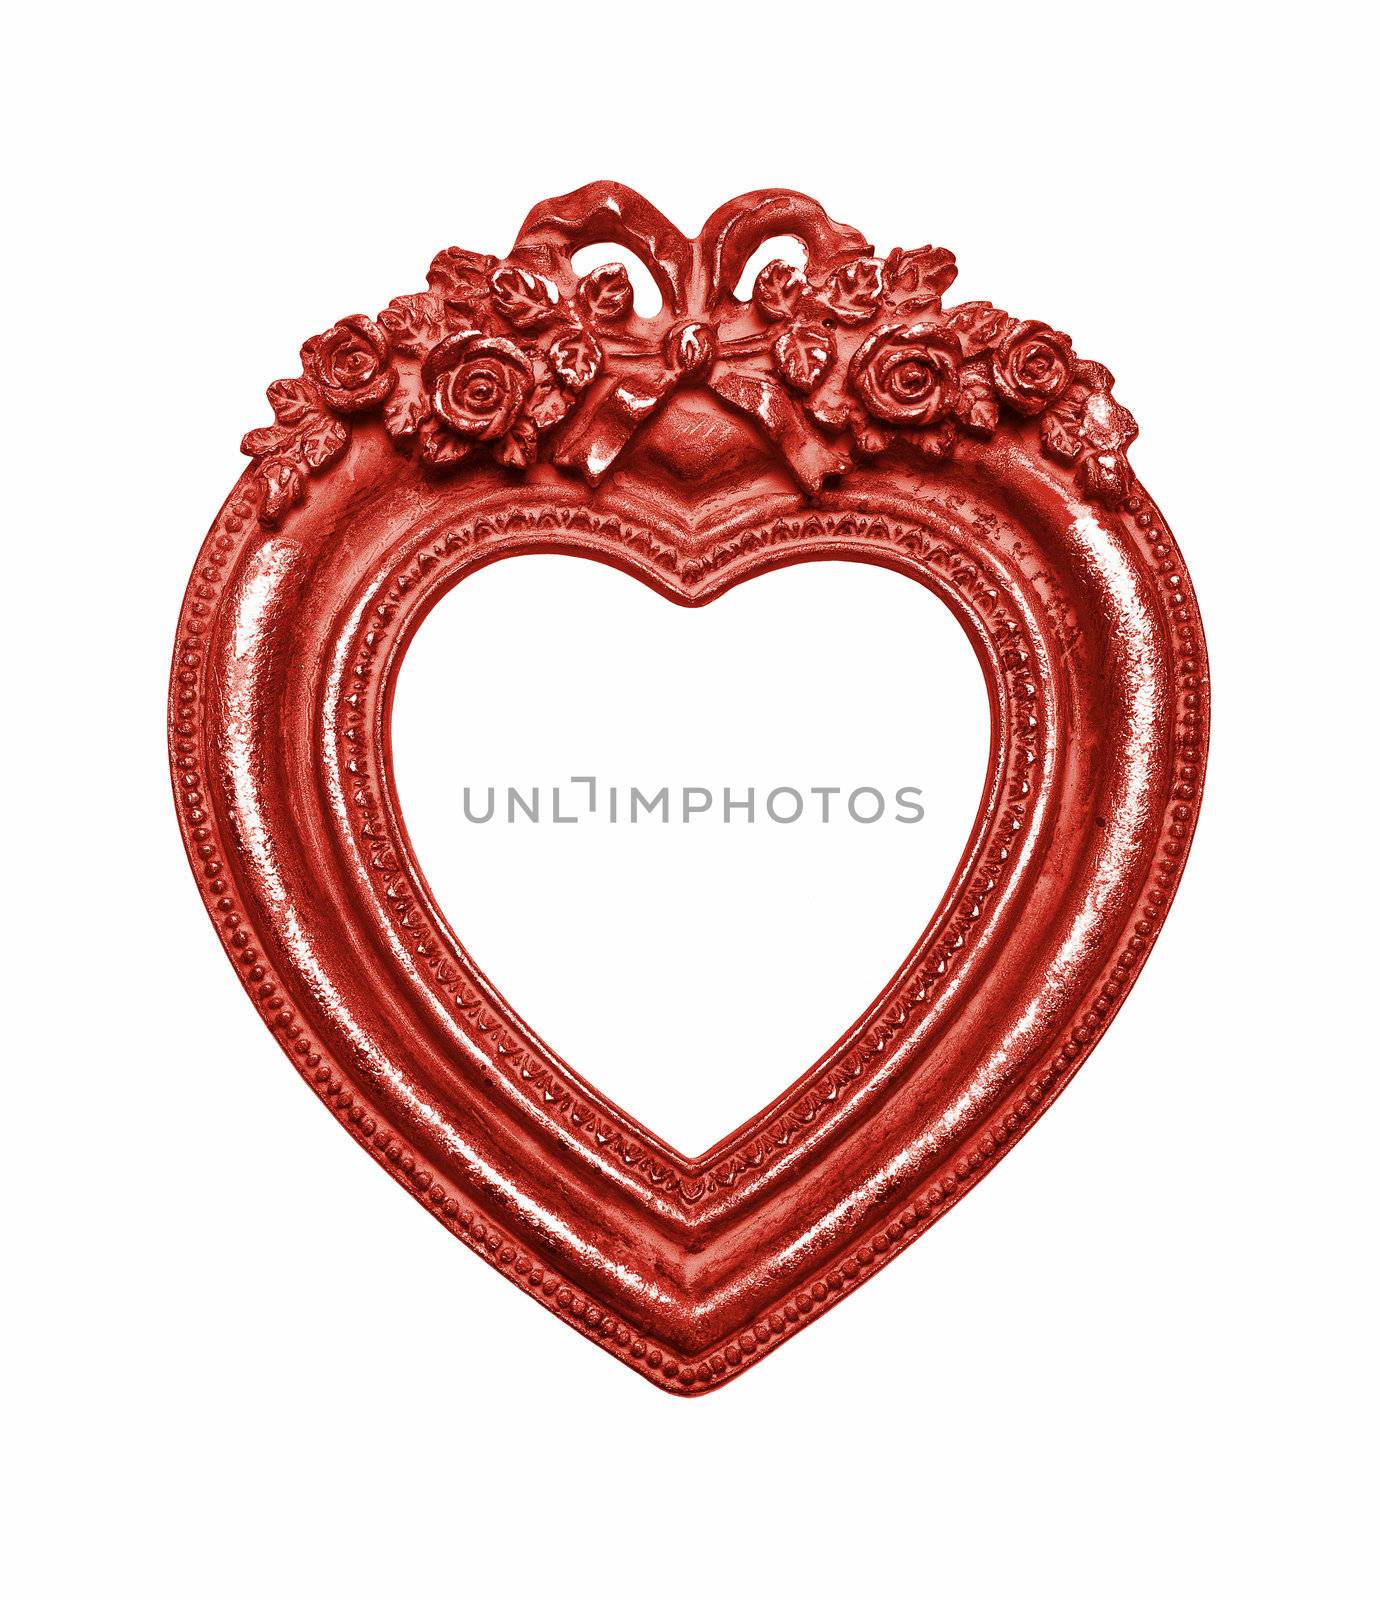 Heart Picture Frame isolated on white background, graphic design element